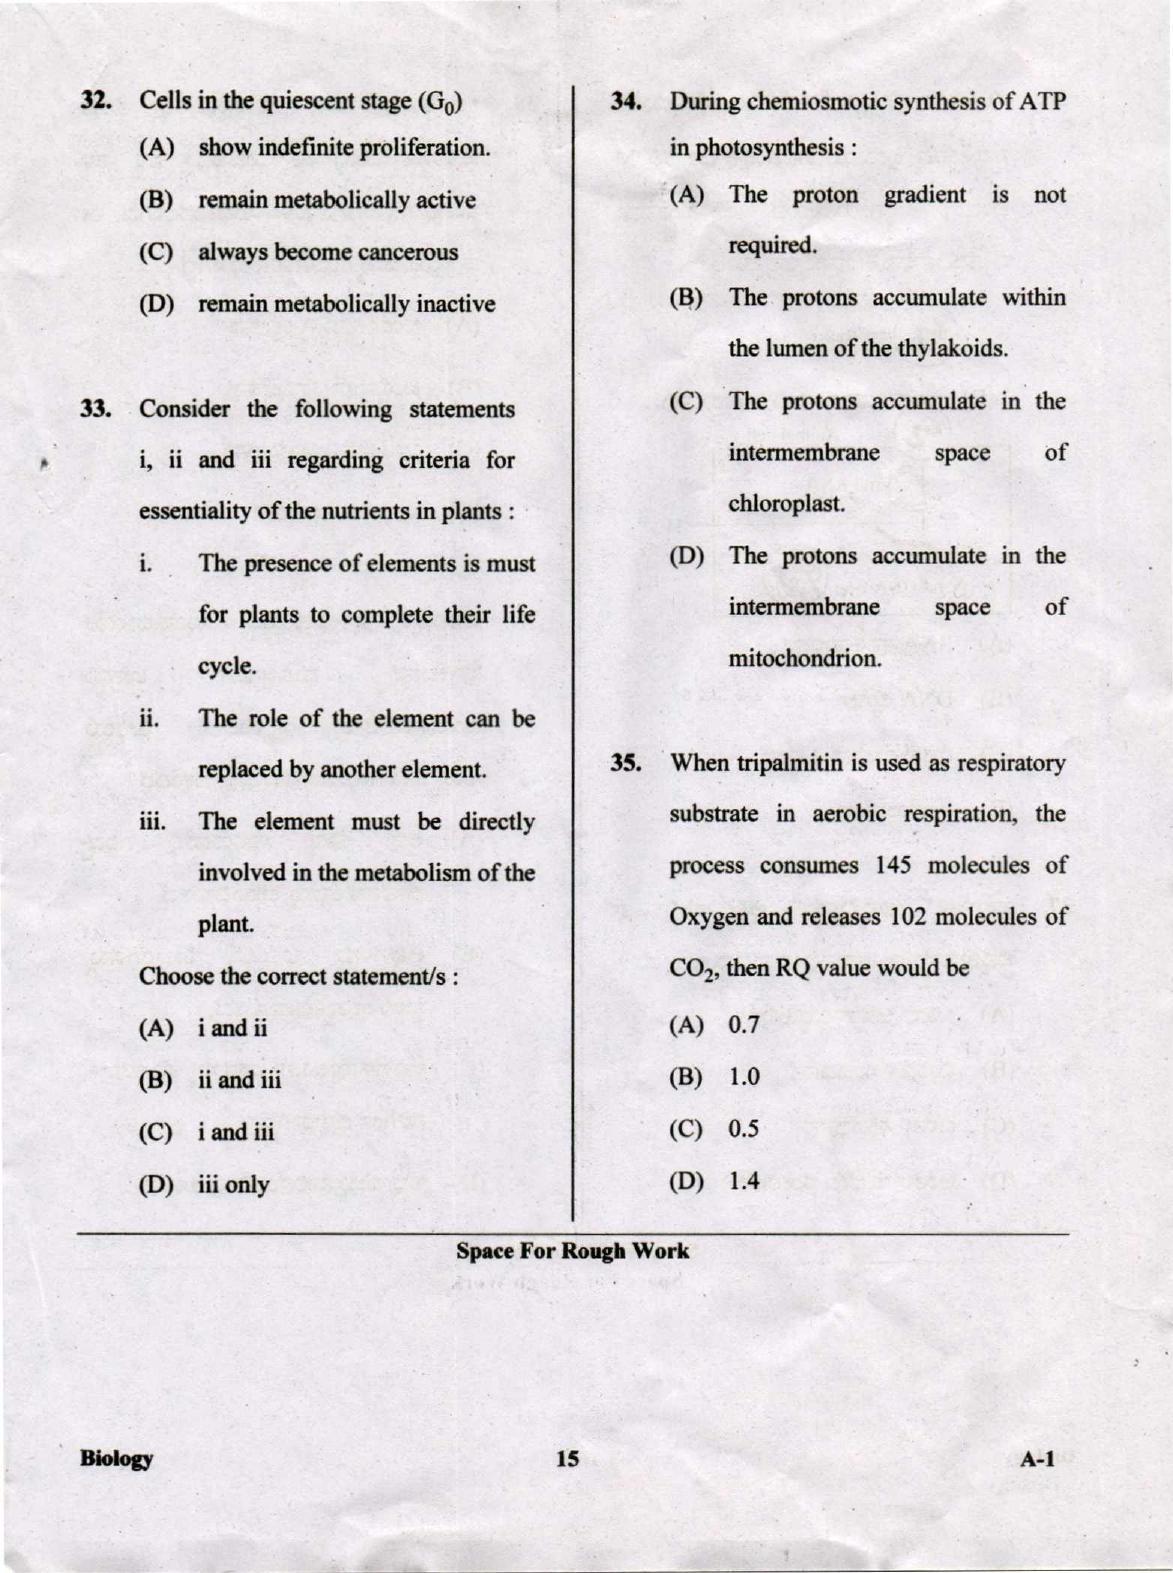 KCET Biology 2019 Question Papers - Page 15